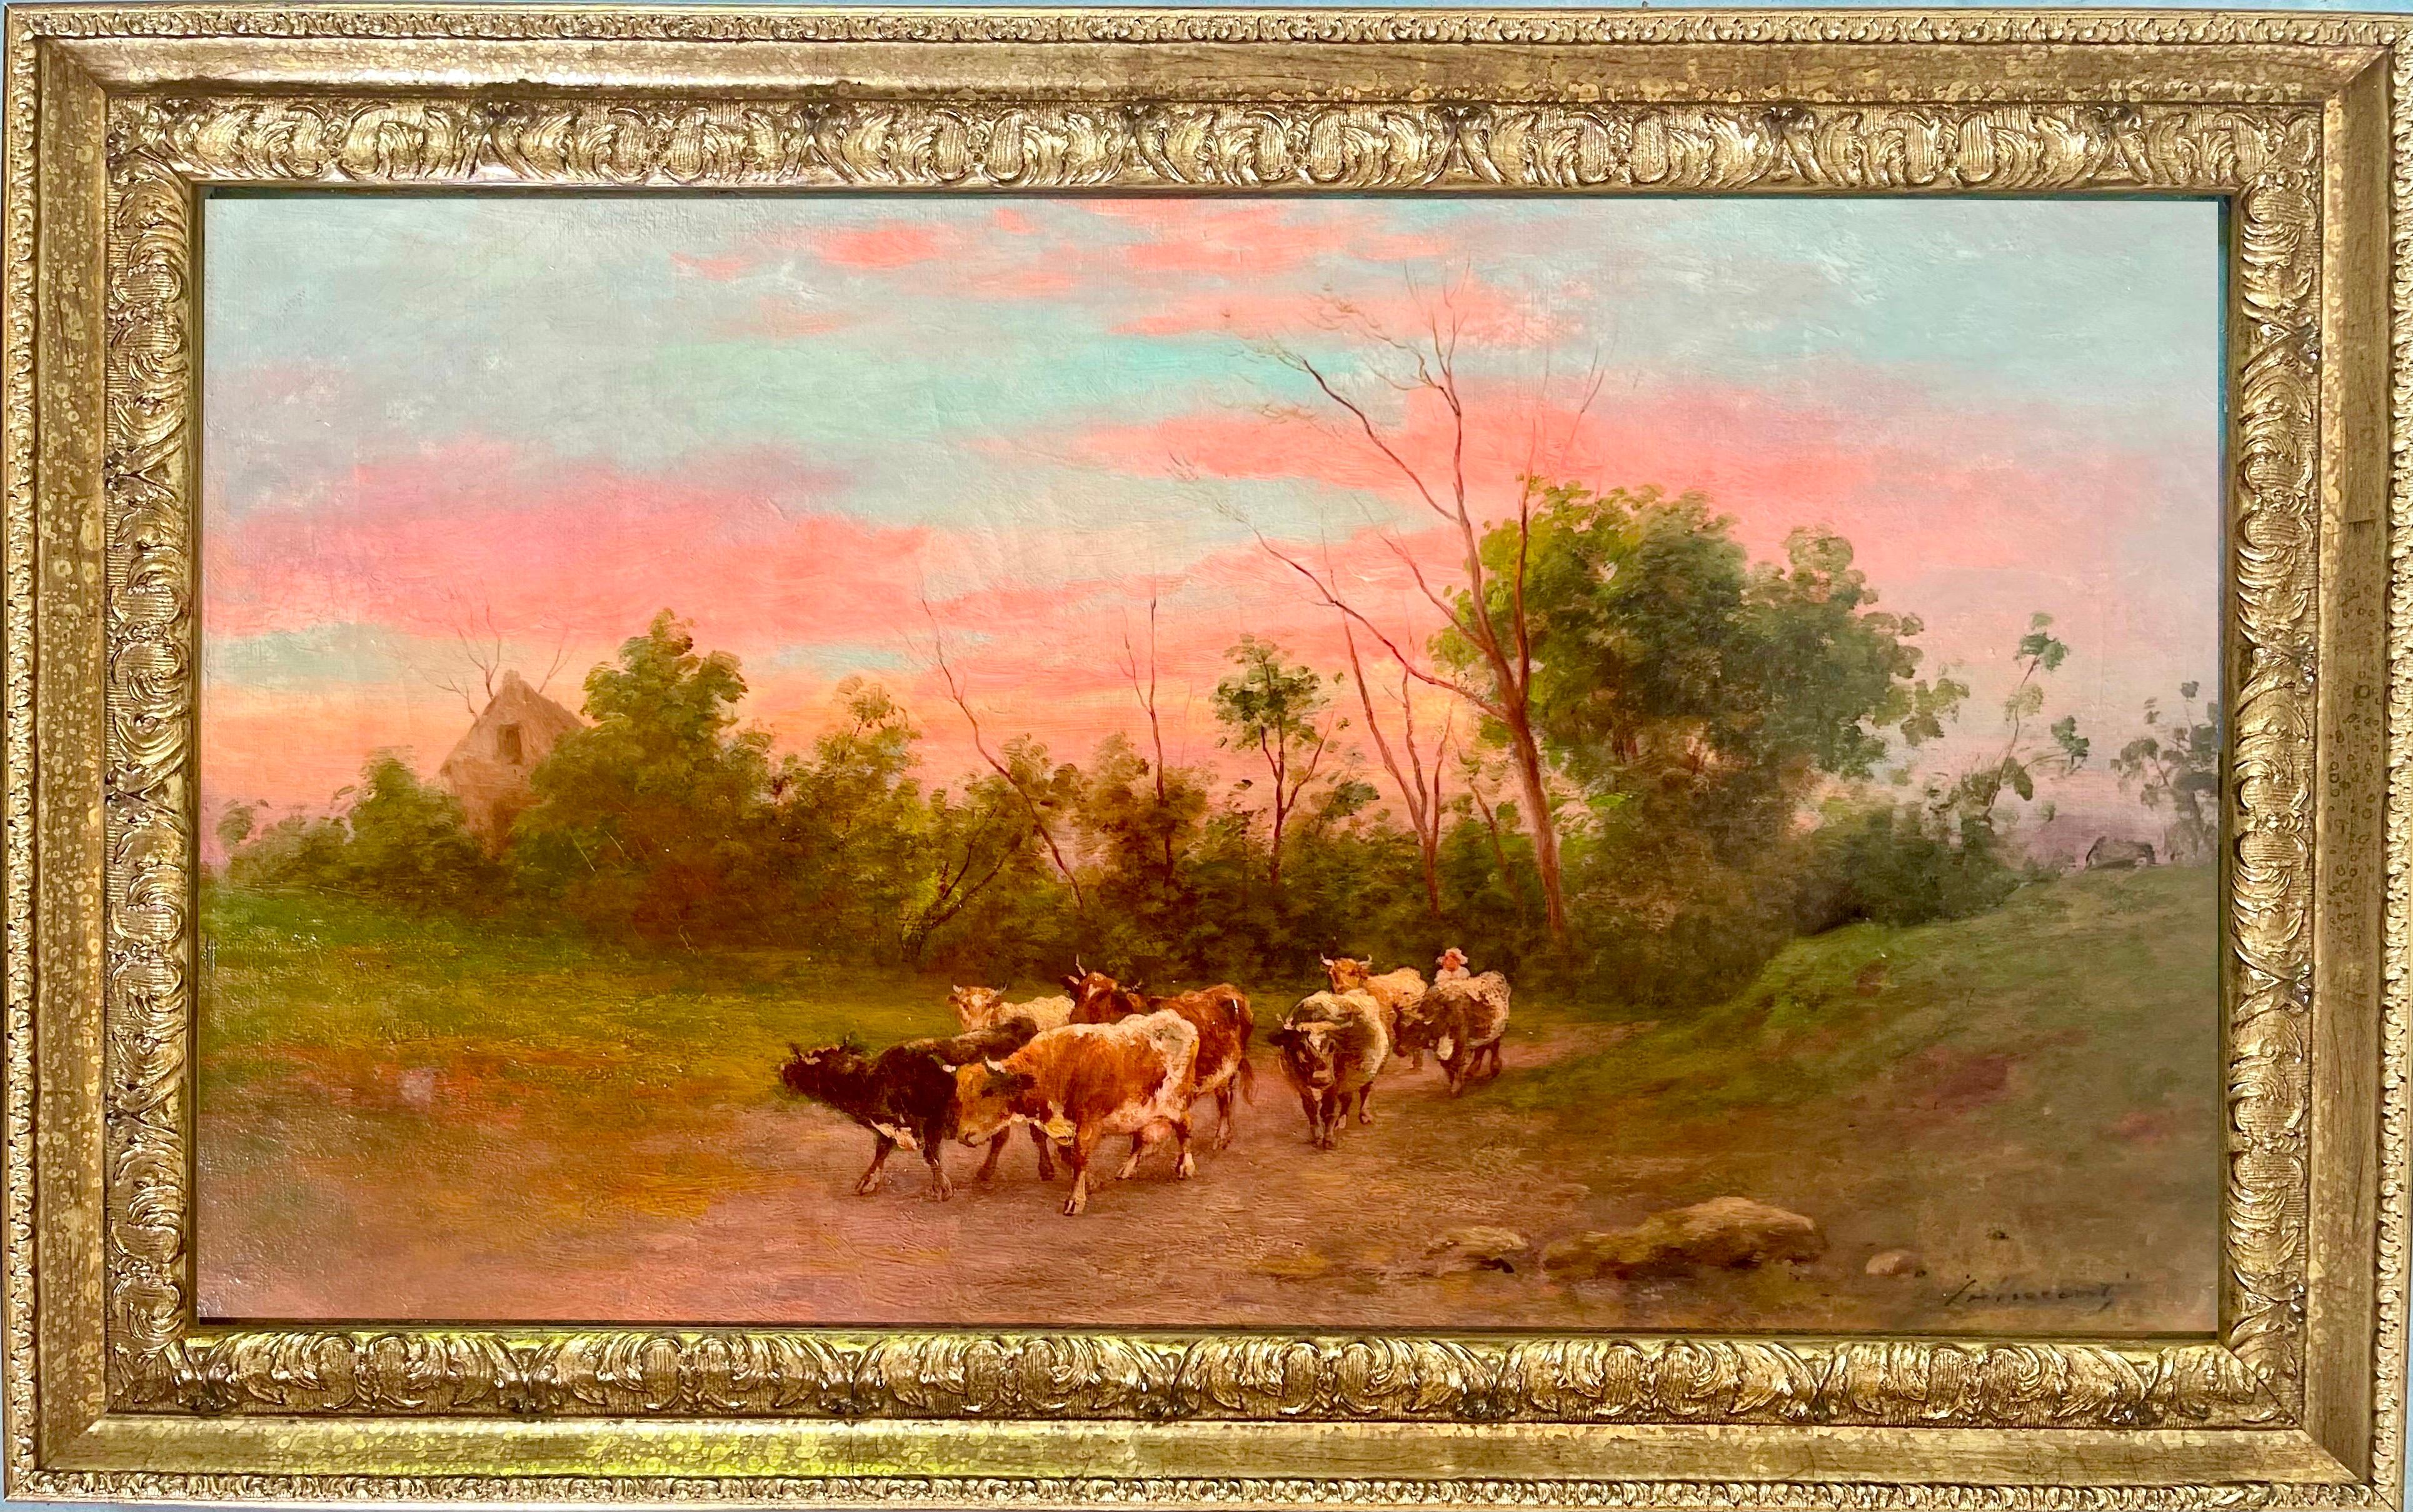 Camillo Innocenti Figurative Painting - 19th century Italian oil painting - A shepherd at sunset in the countryside